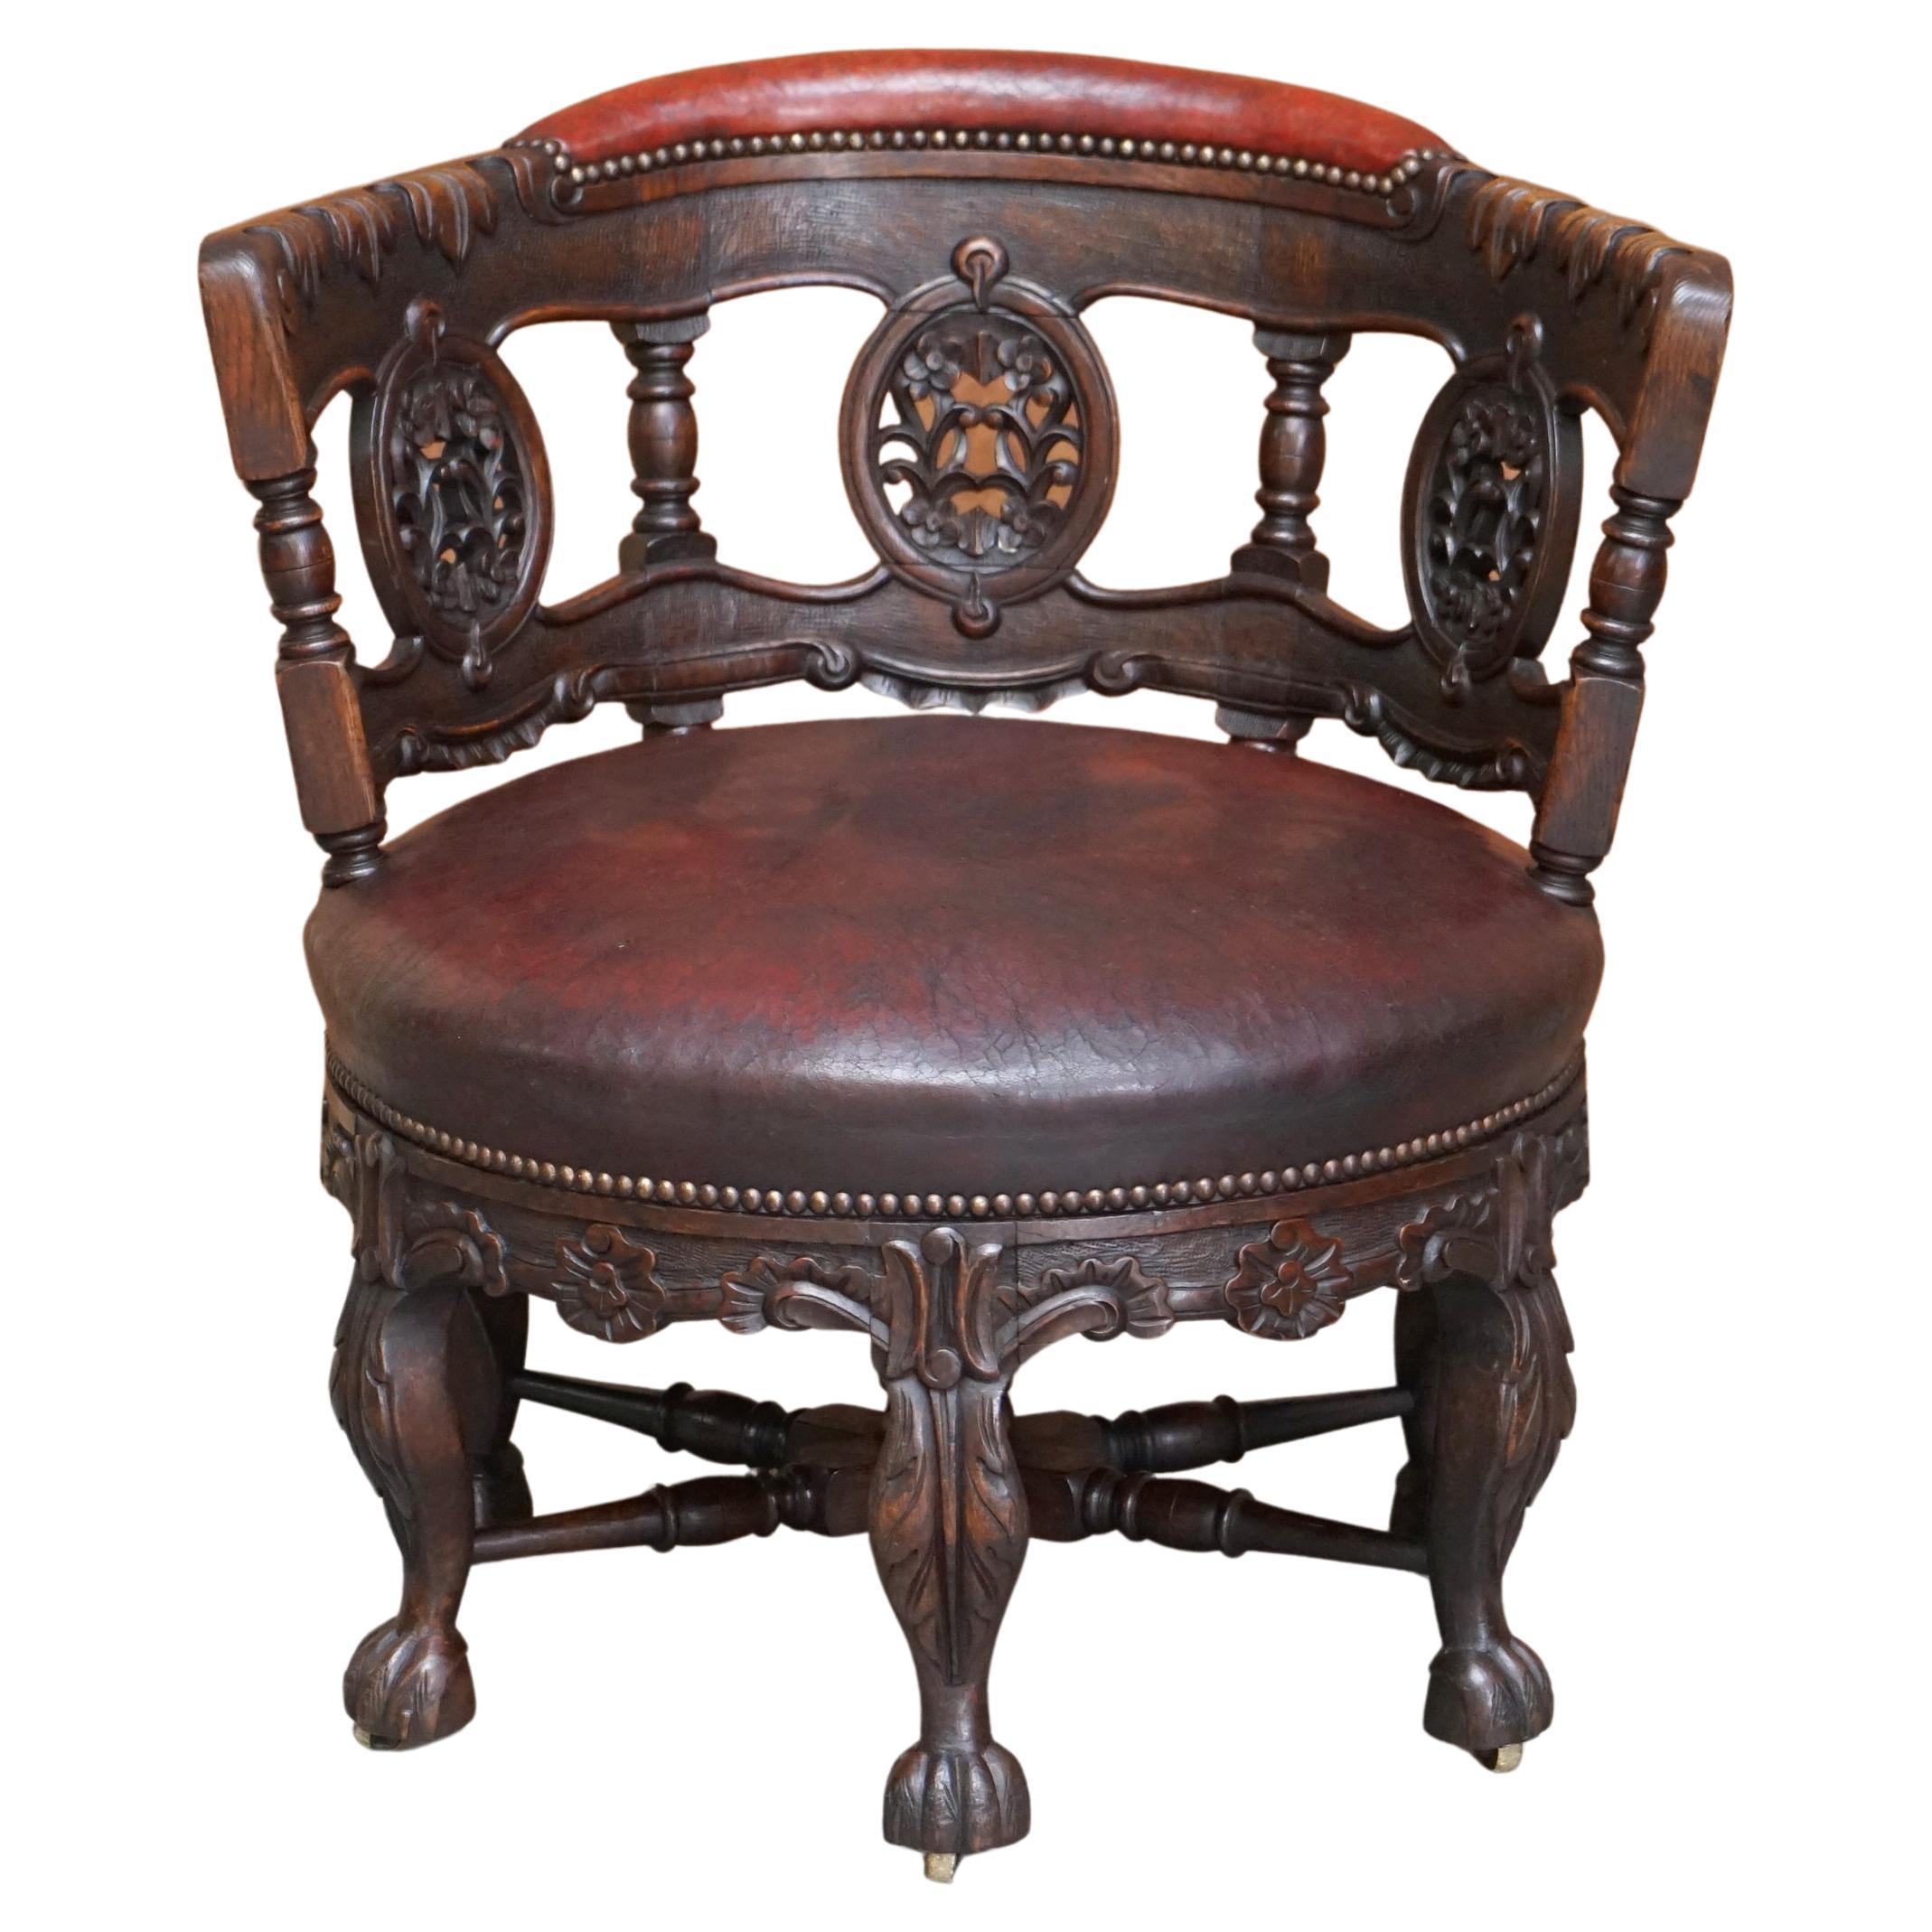 Antique Carved Victorian Oxblood Leather Burgermeister Chair 17th Century Design For Sale